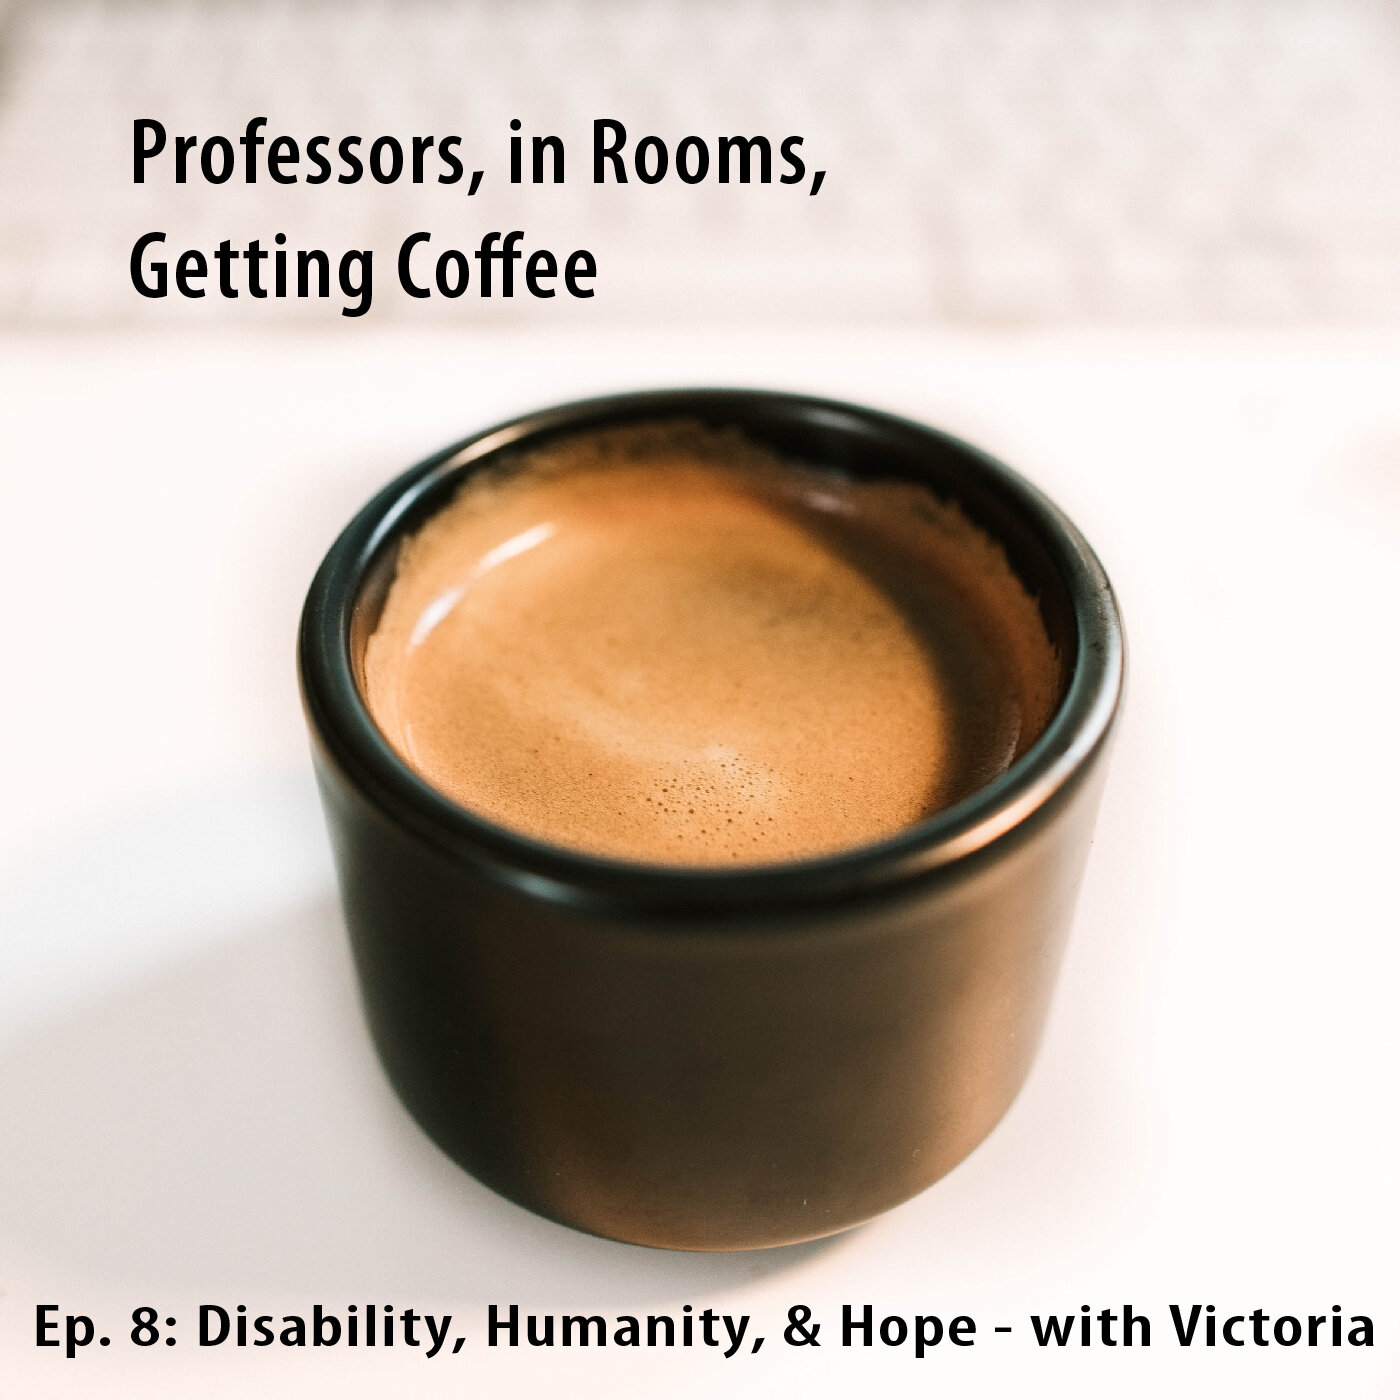 Humanity, Disability, and Hope - with Victoria